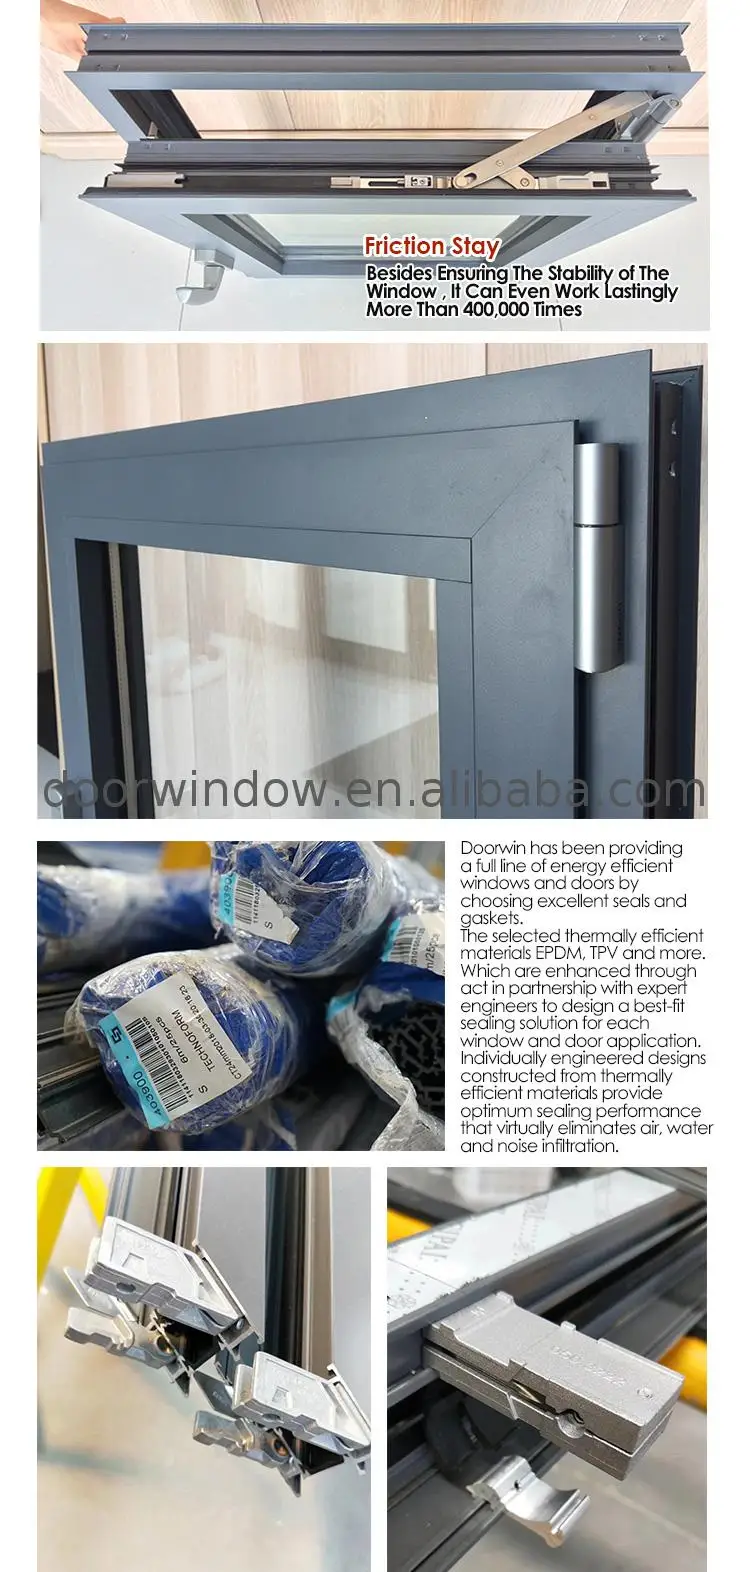 Casement windows and doors with asia style as1288 sgs certificate american standard